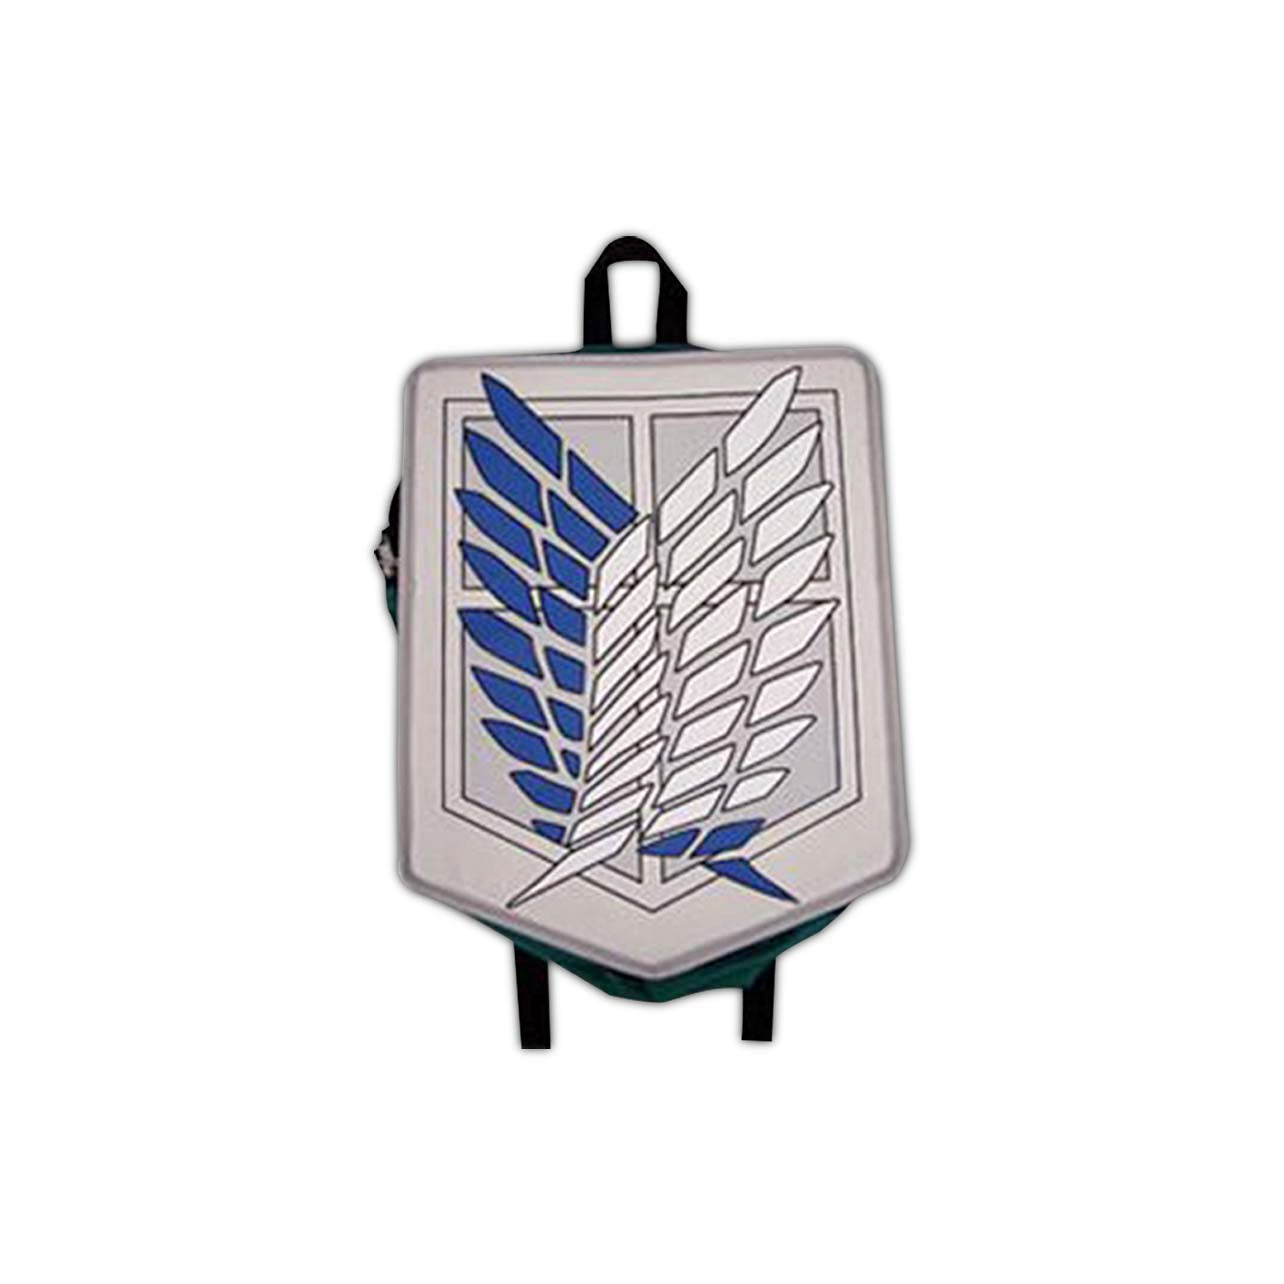 Attack on Titan - Scout Regiment Backpack image count 0